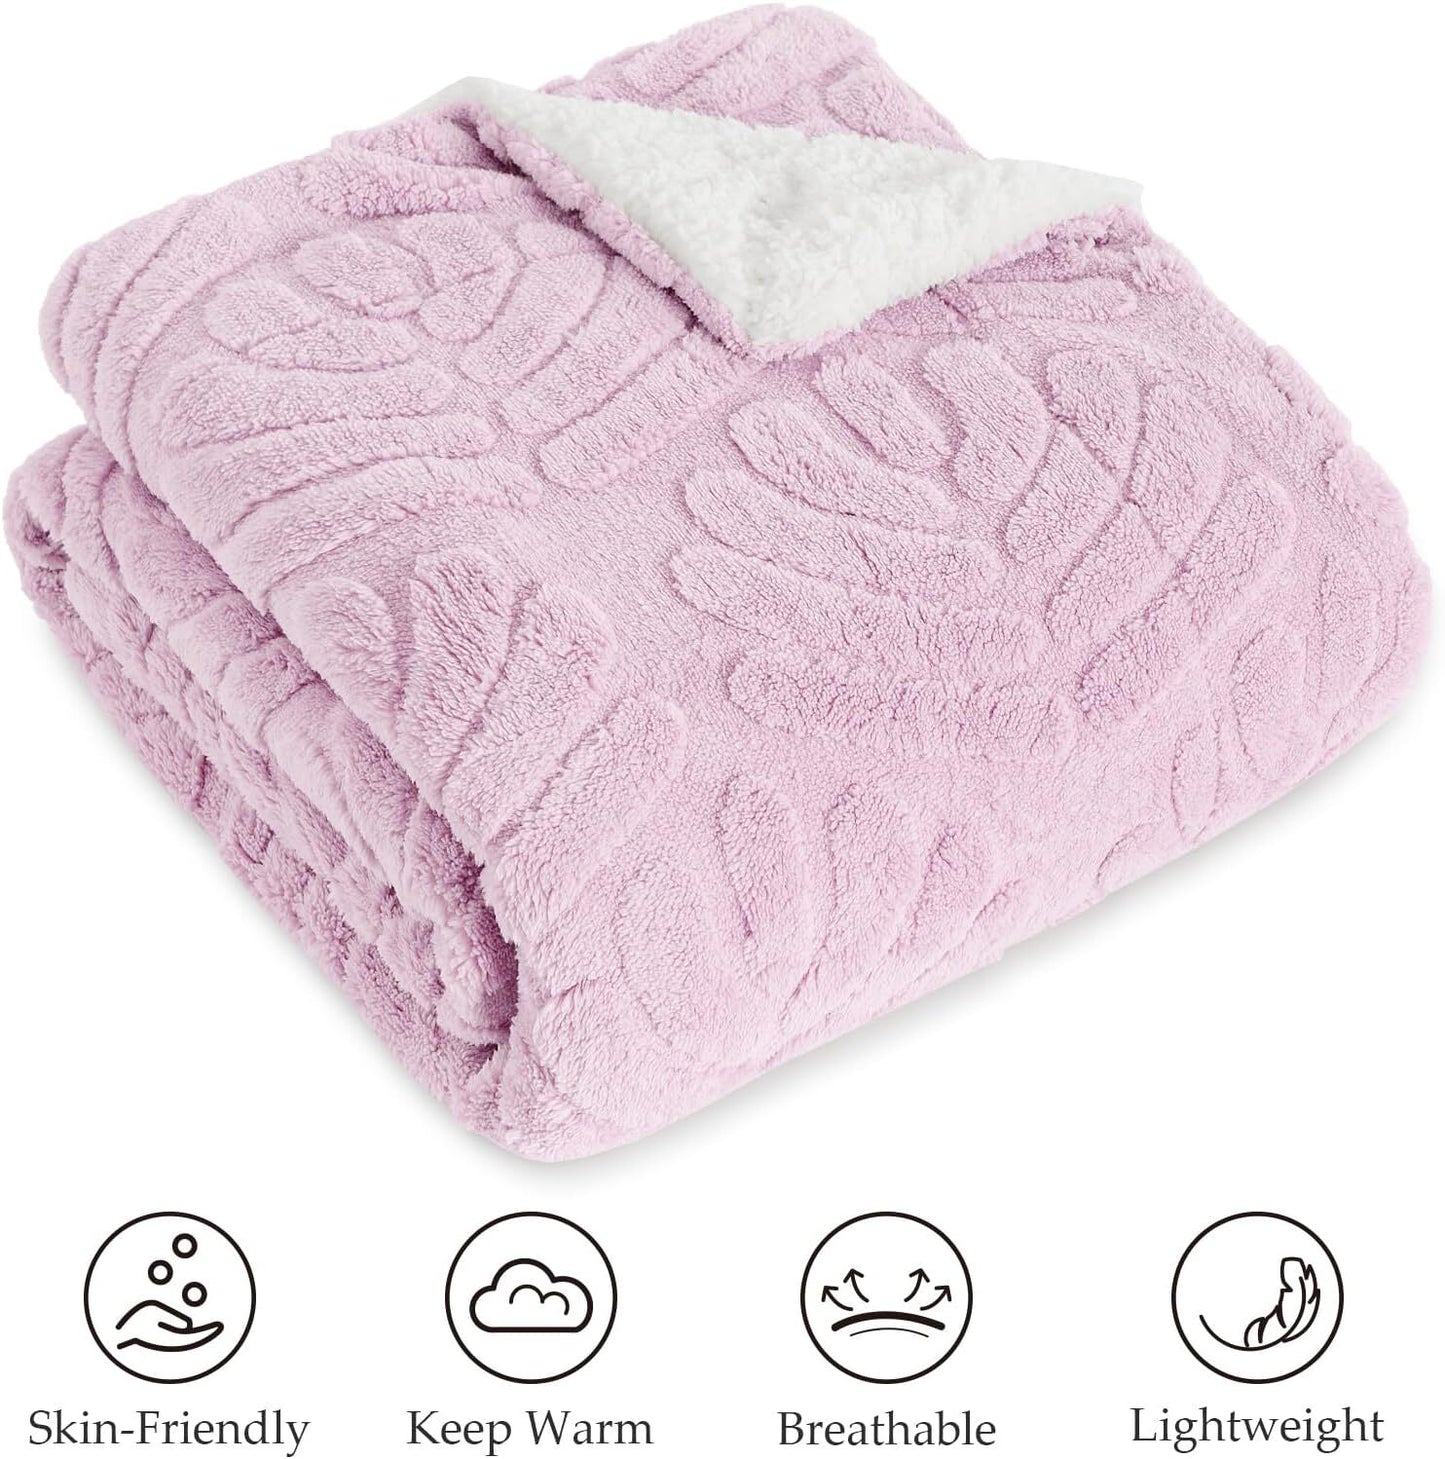 Whale Flotilla Sherpa Fleece Blanket for Twin Size Bed, Reversible Lightweight Blankets Warm Plush Bed Blanket for Winter Ultra Soft with Decorative Jacquard Pattern 60x80 Inch, Lilac